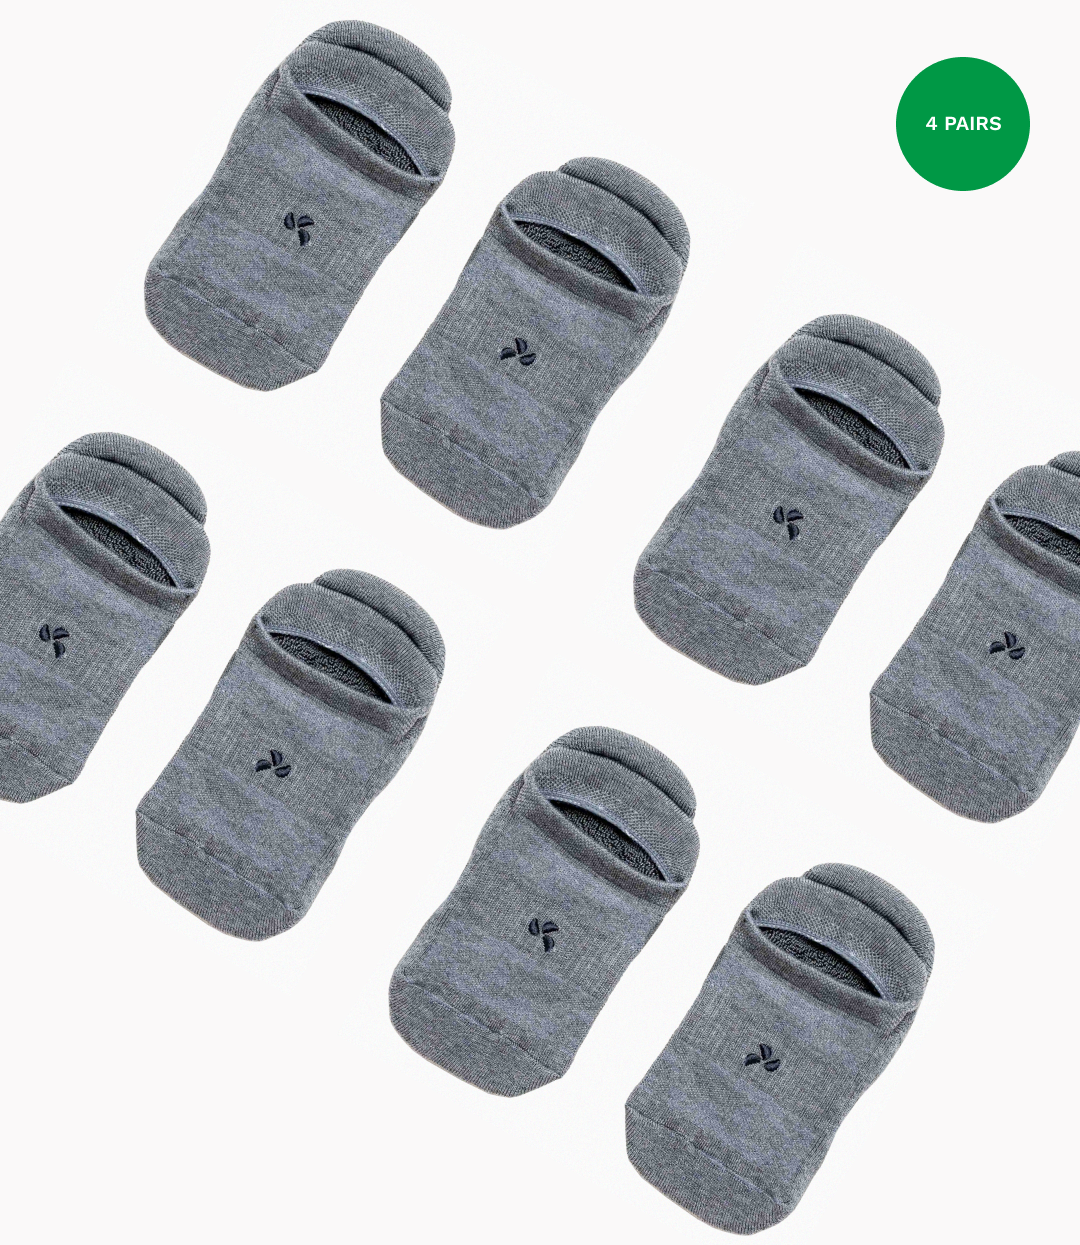 Bamboo Charcoal Socks Value Pack | 4-Pack